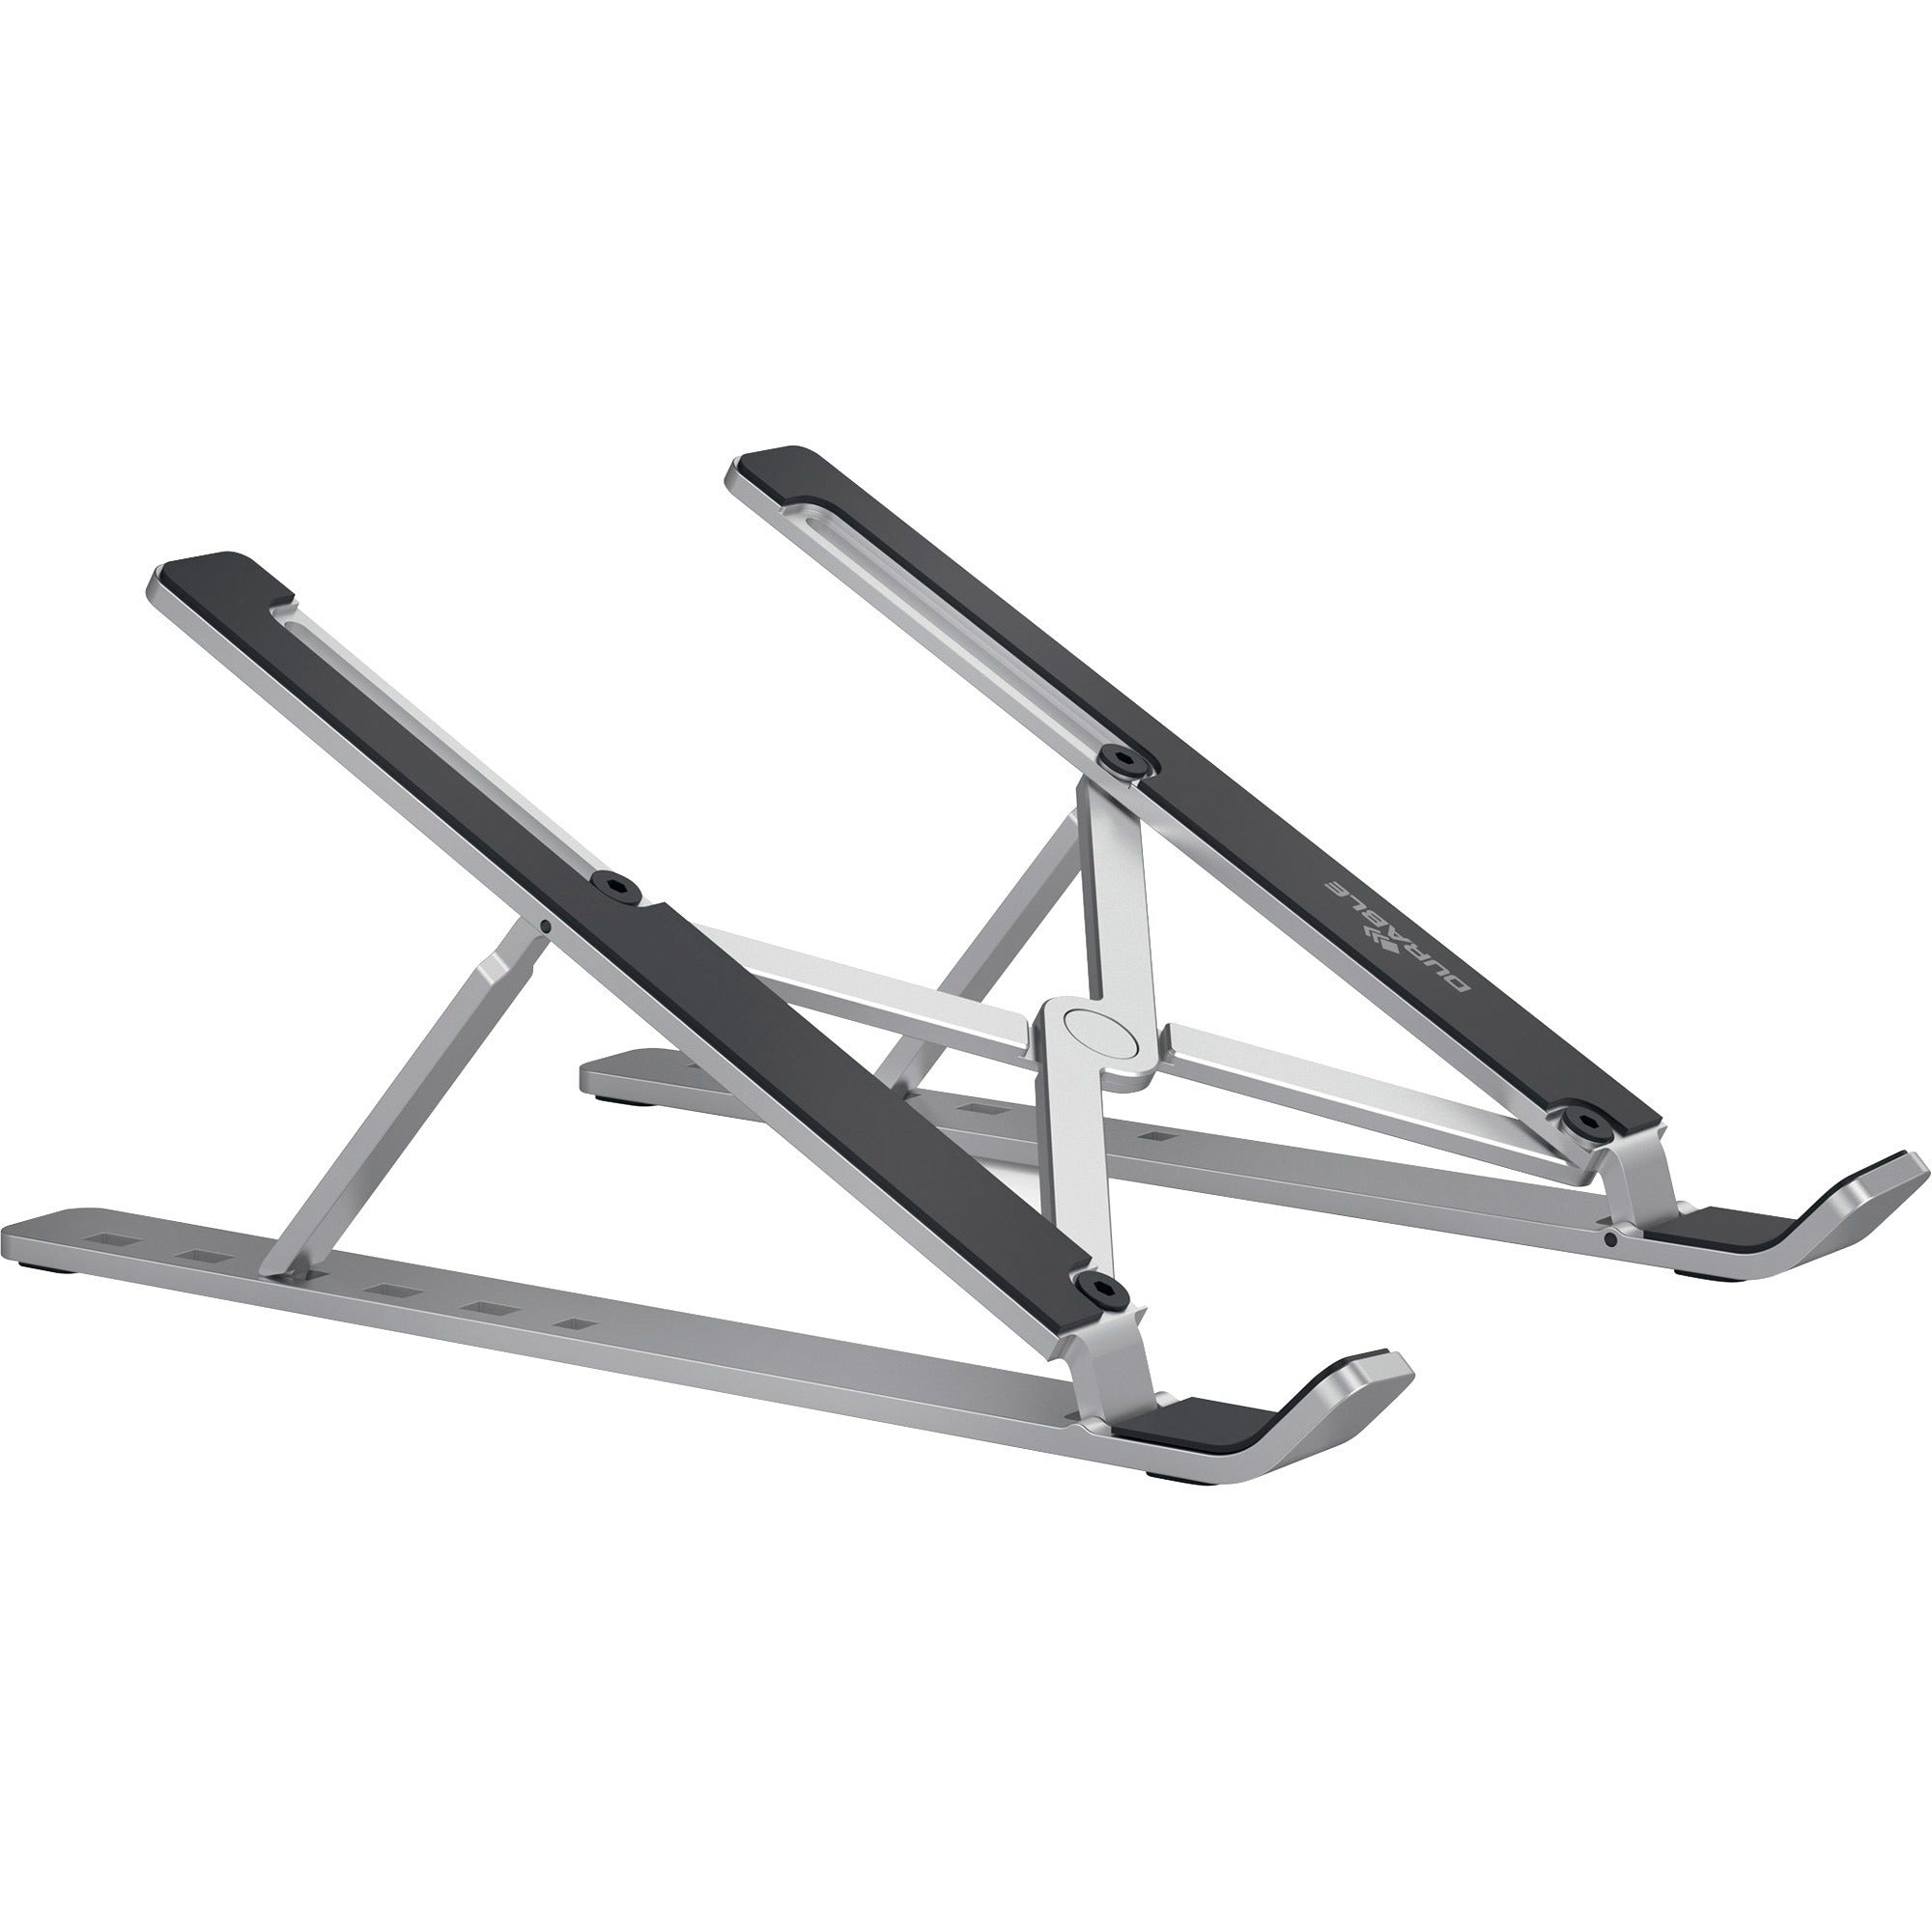 durable-laptop-stand-fold-upto-15-screen-size-notebook-support-aluminum-silver_dbl505123 - 1